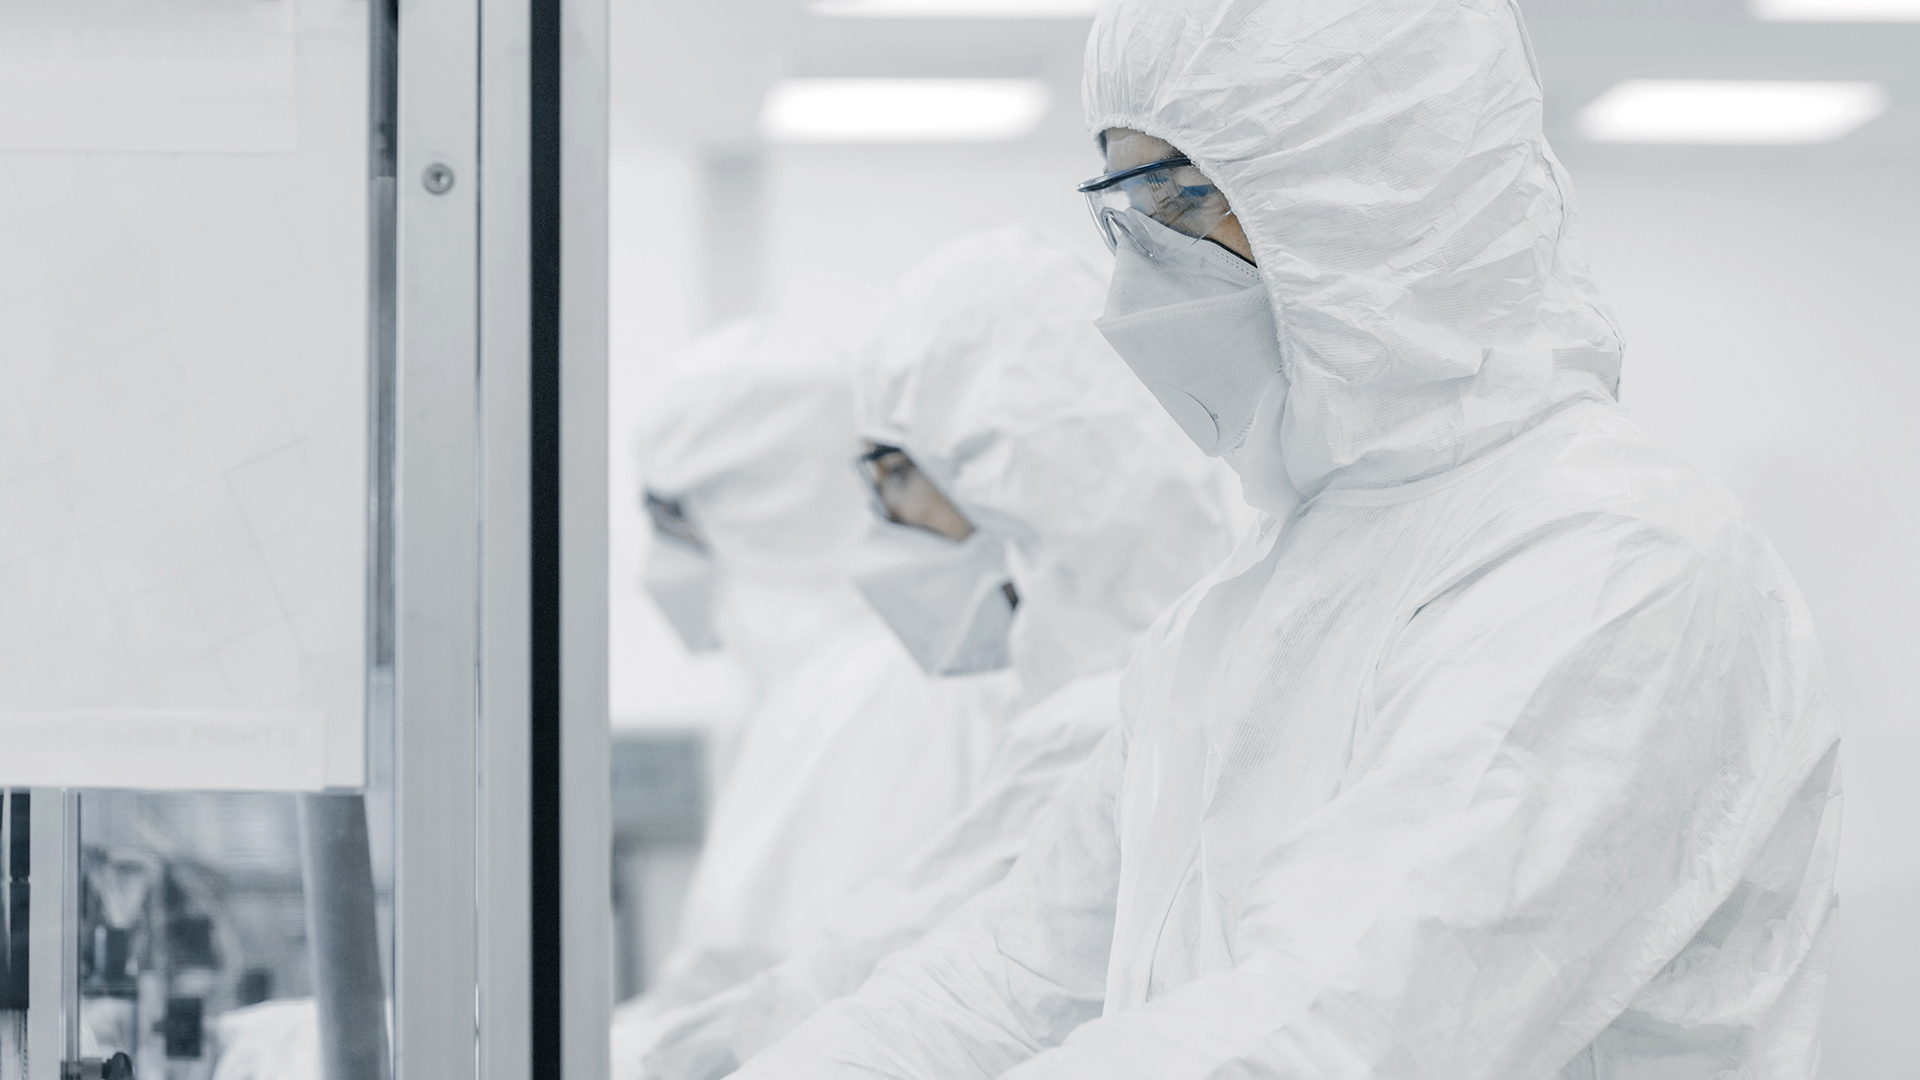 Three persons in cleanroom suits